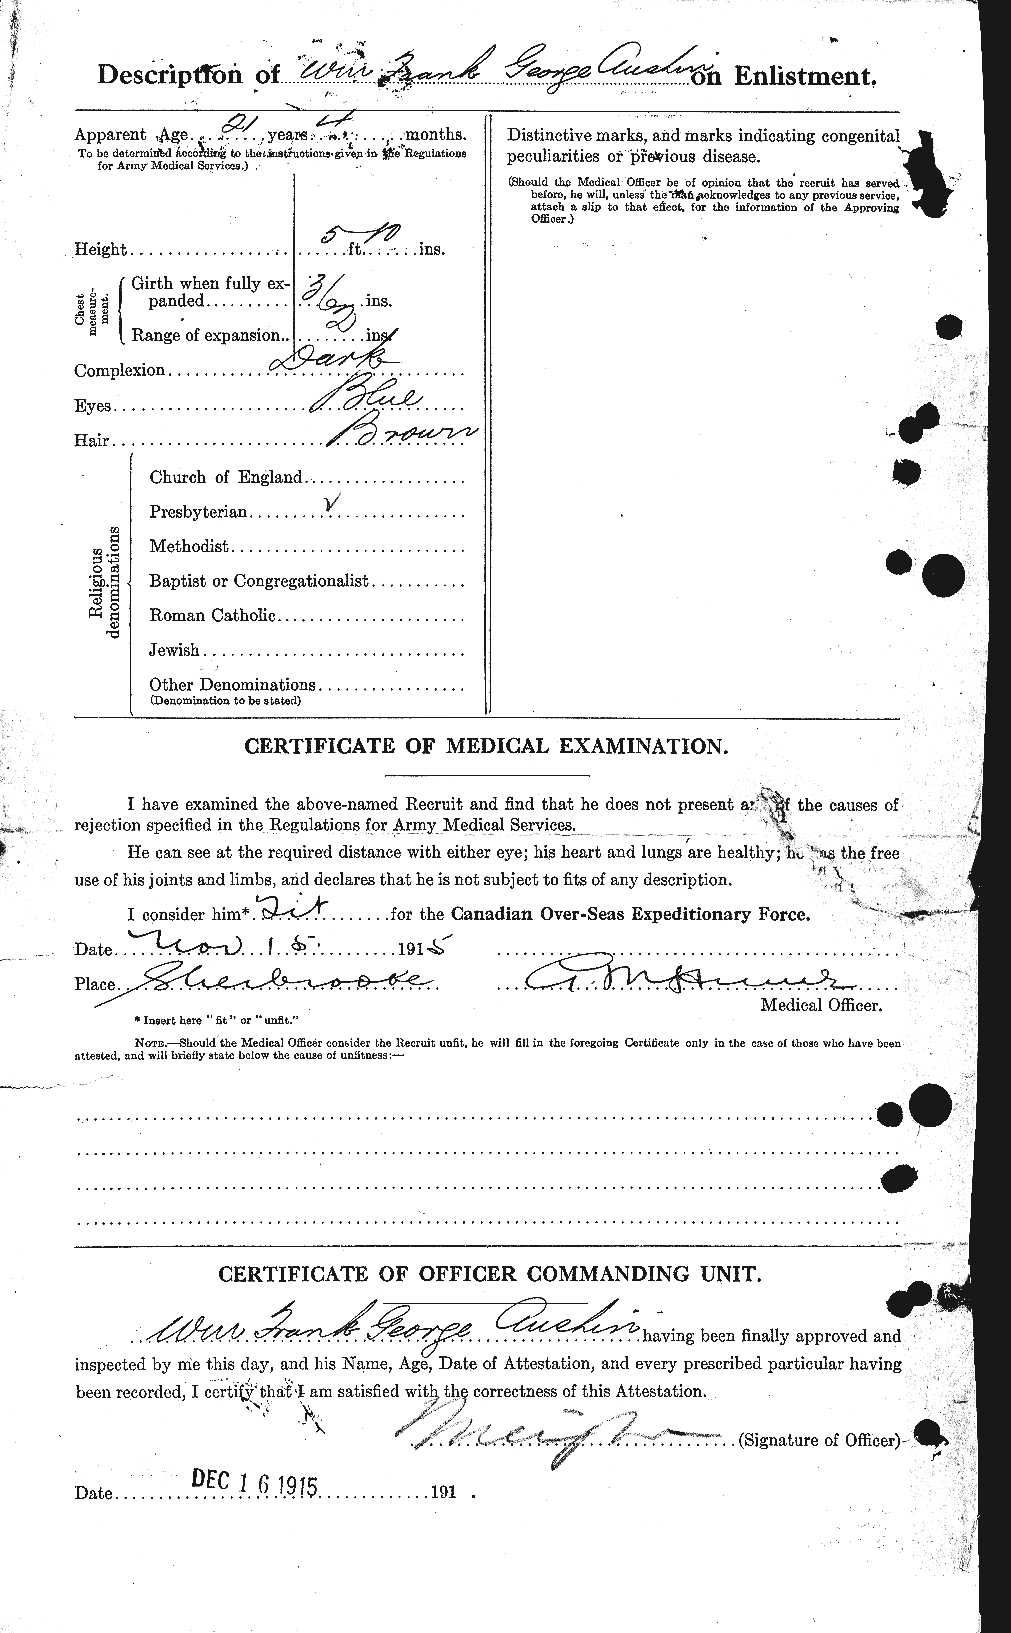 Personnel Records of the First World War - CEF 215412b